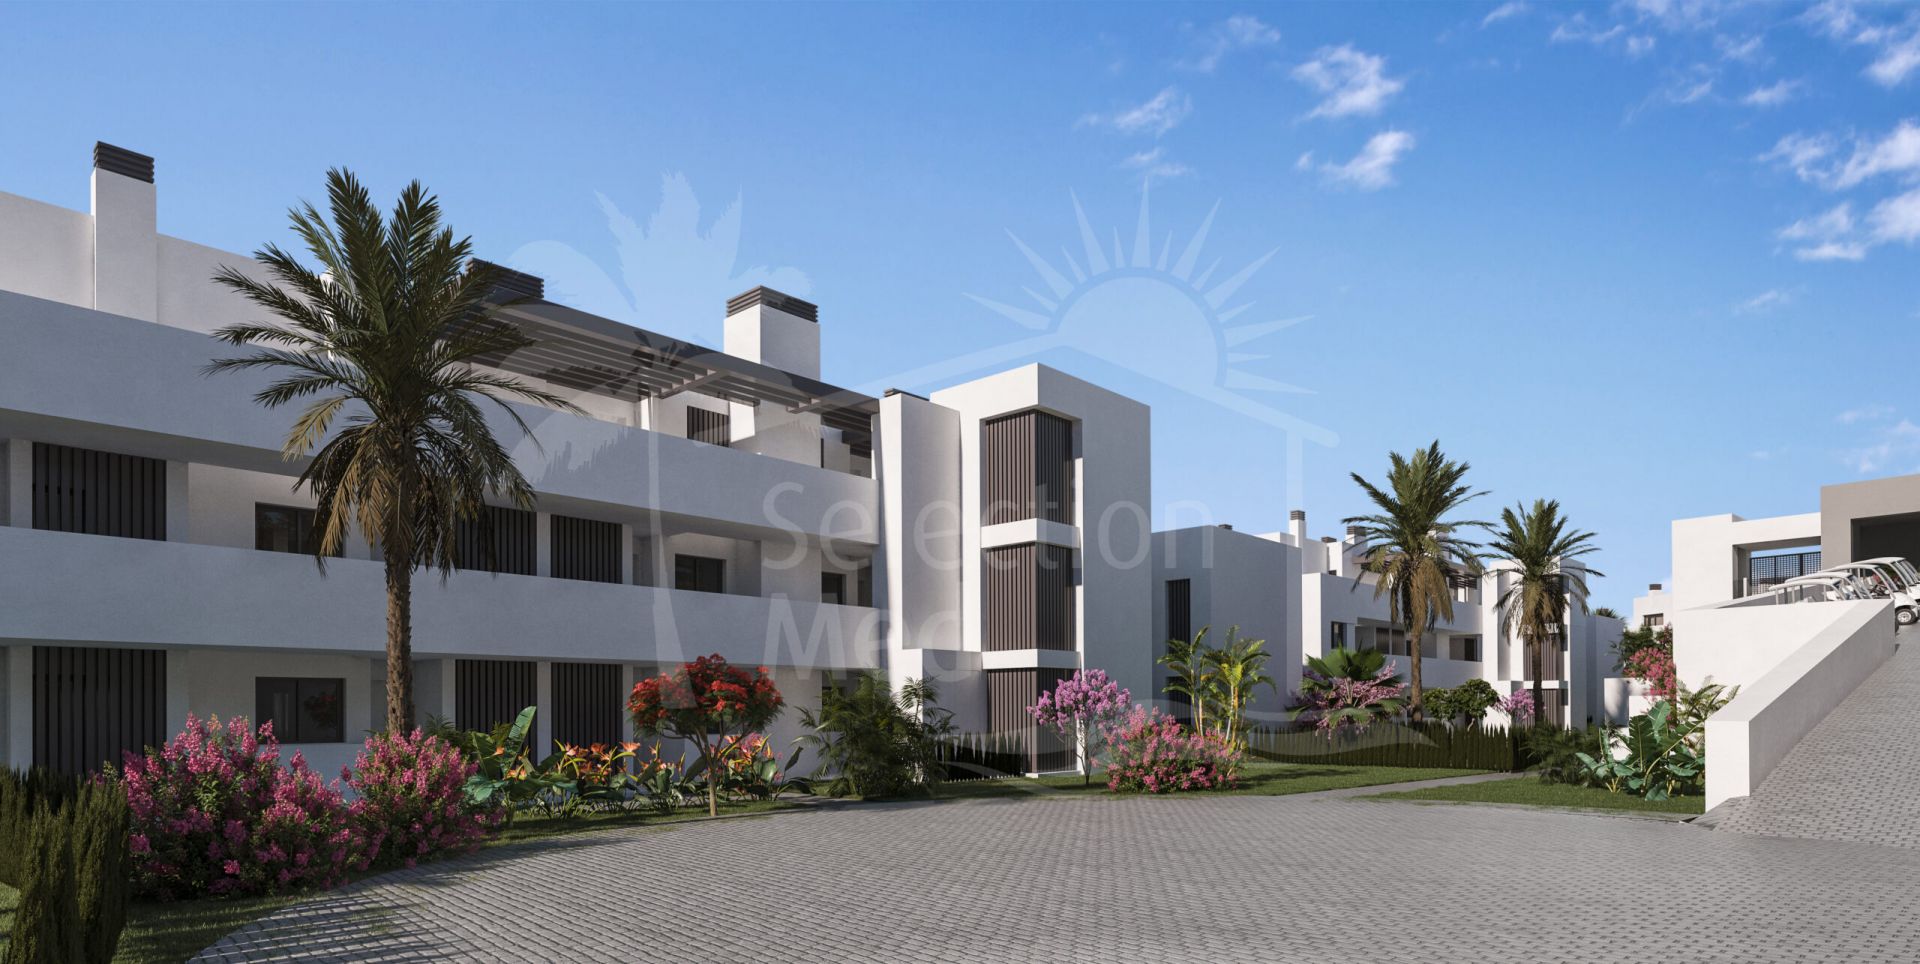 Investment Opportunity – Brand New Off-Plan 2 Bedroom Apartment with Open Views, in La Alcaidesa